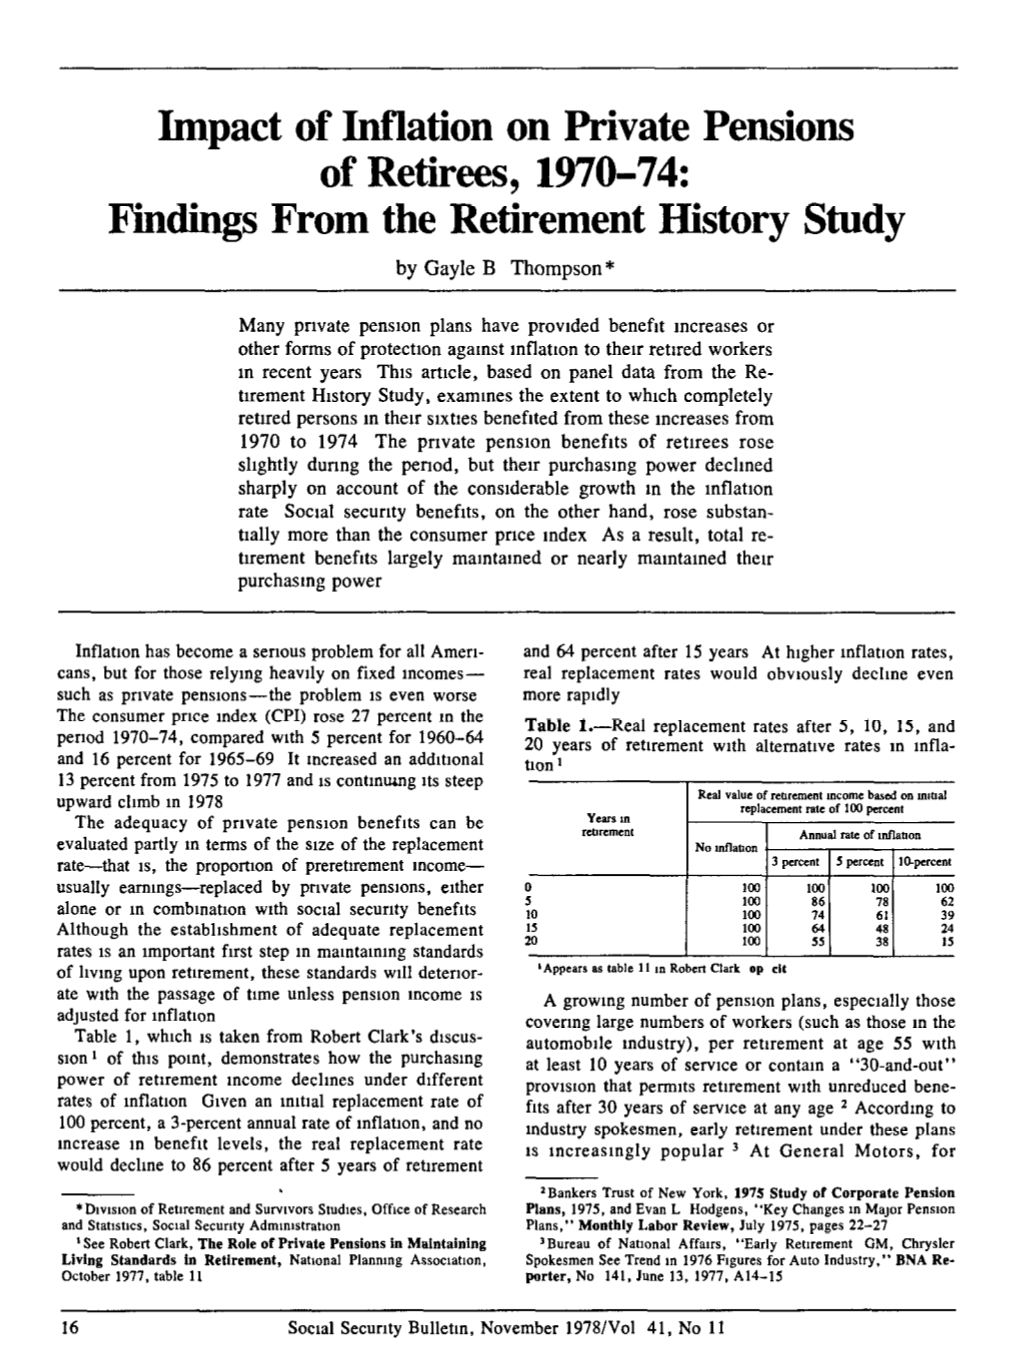 Impact of Inflation on Private Pensions of Retirees, 1970–74: Findings from the Retirement History Study